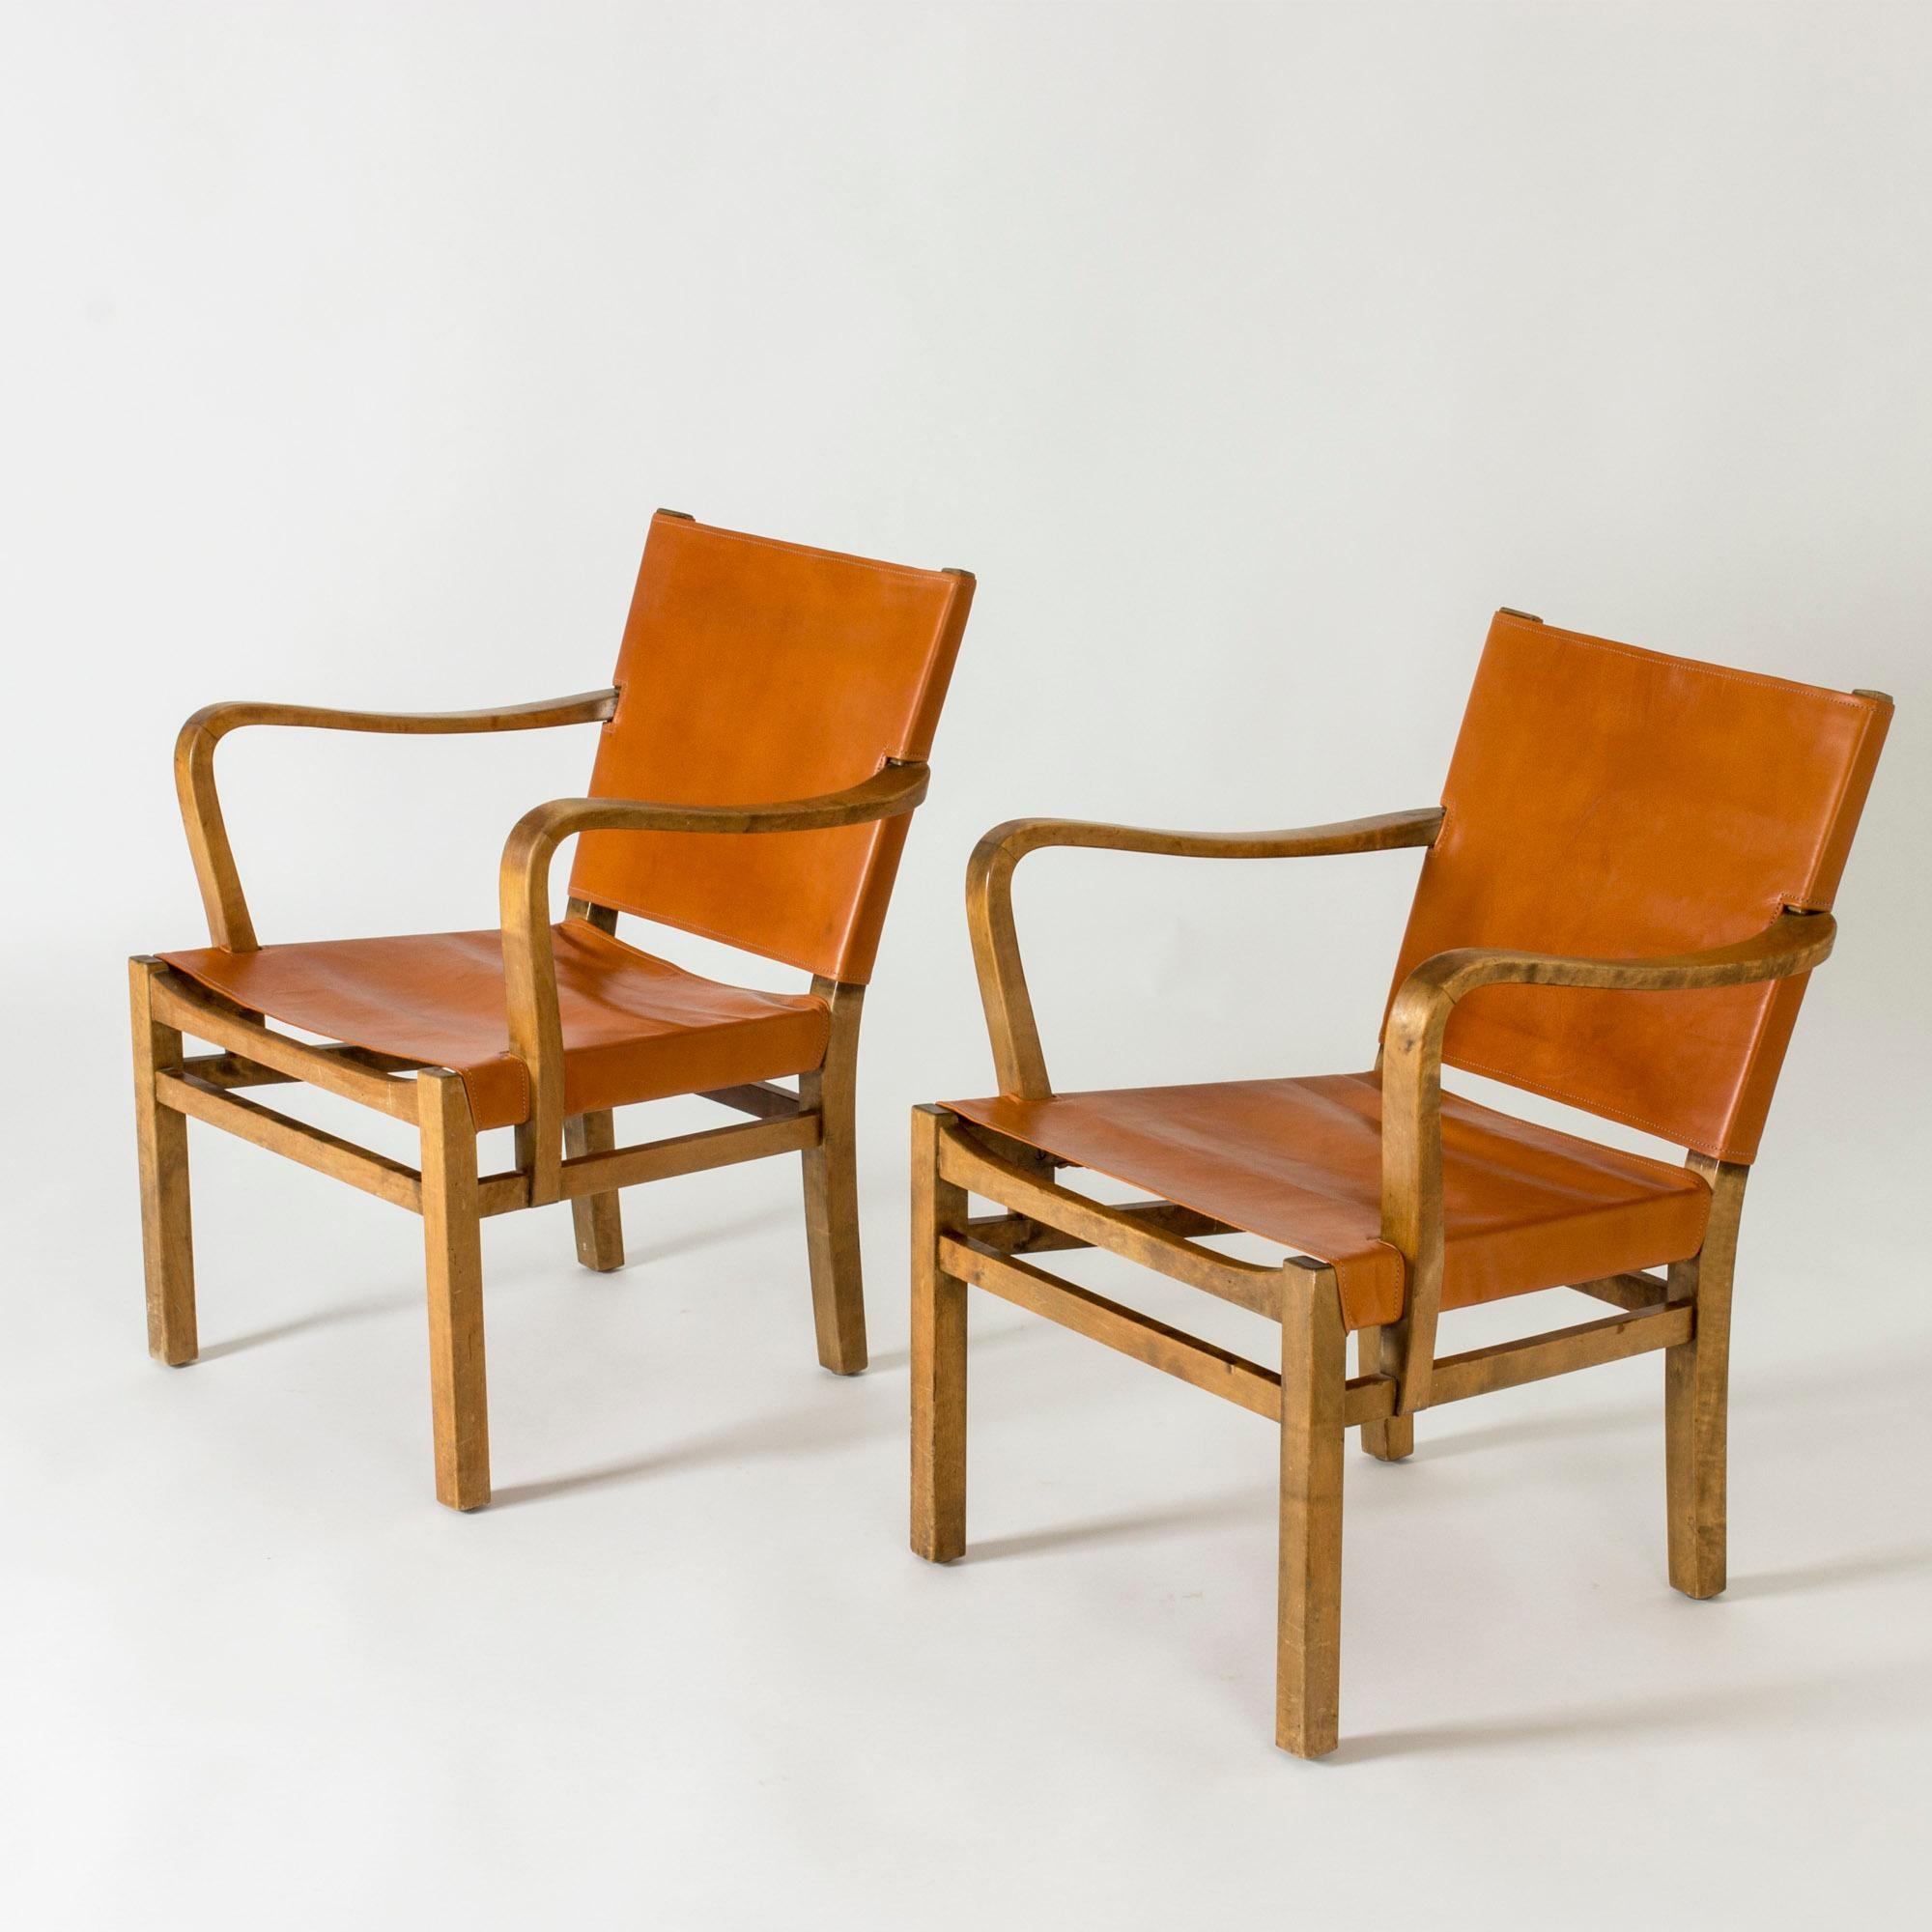 Pair of elegant armchairs by Elias Svedberg, made from birch with flowing lines and an open silhouette. Upholstered with supple brown leather.